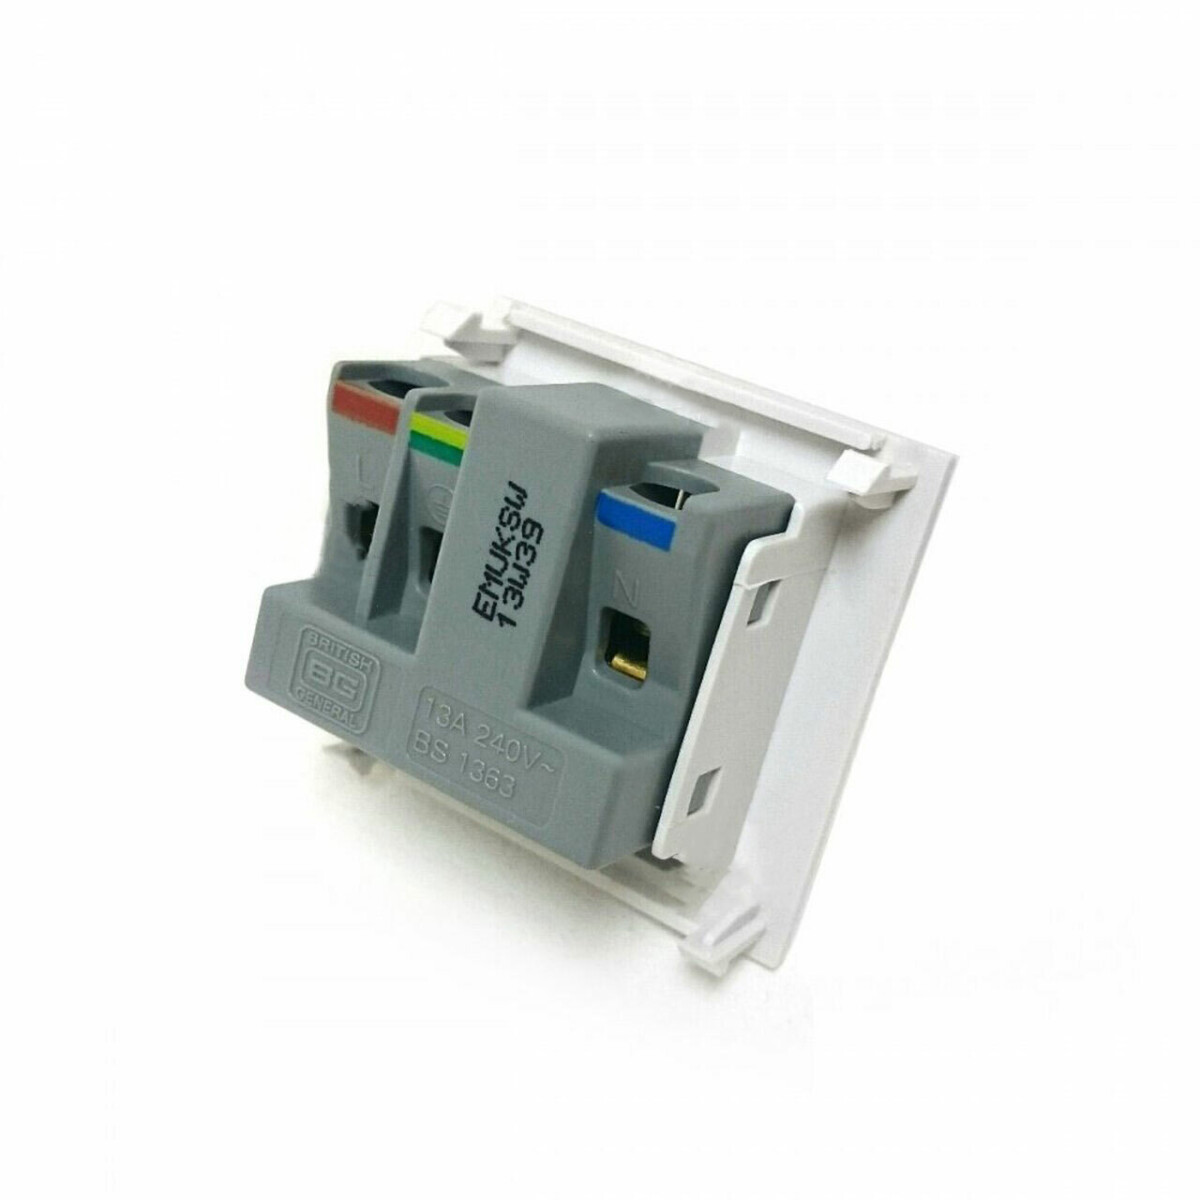 bg-electrical-emuksw-euro-module-13-amp-uk-3-pin-unswitched-socket-in-white-p3725-6649_zoom__97149.1611334418__50181.1612864490